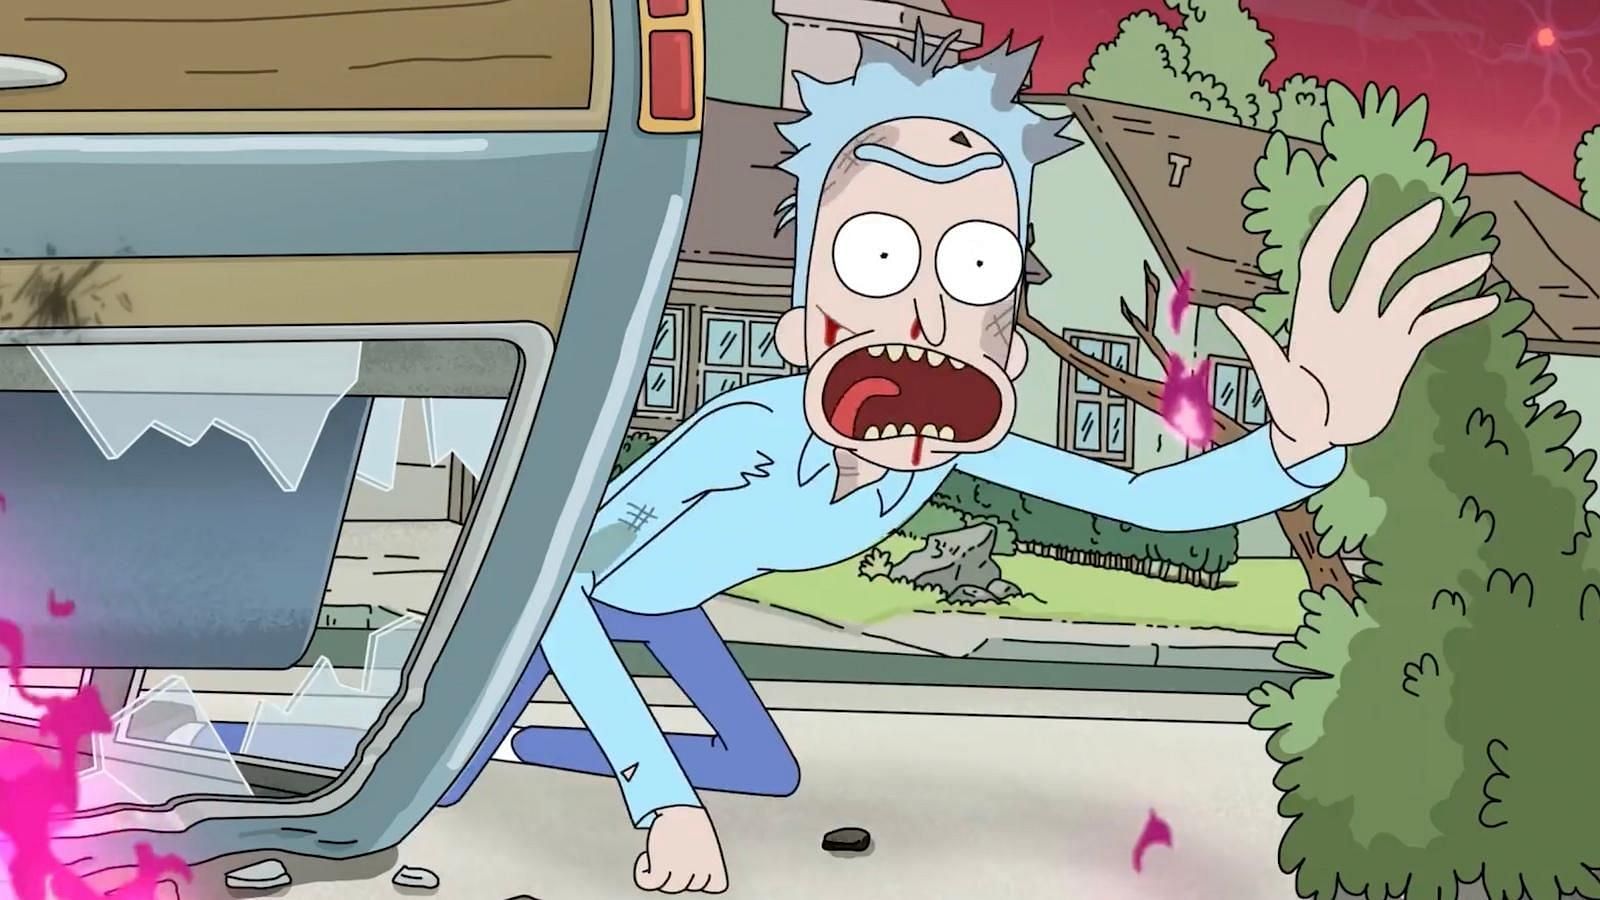 Fans of Rick and Morty can watch season 7 episode 4 on Adult Swim.